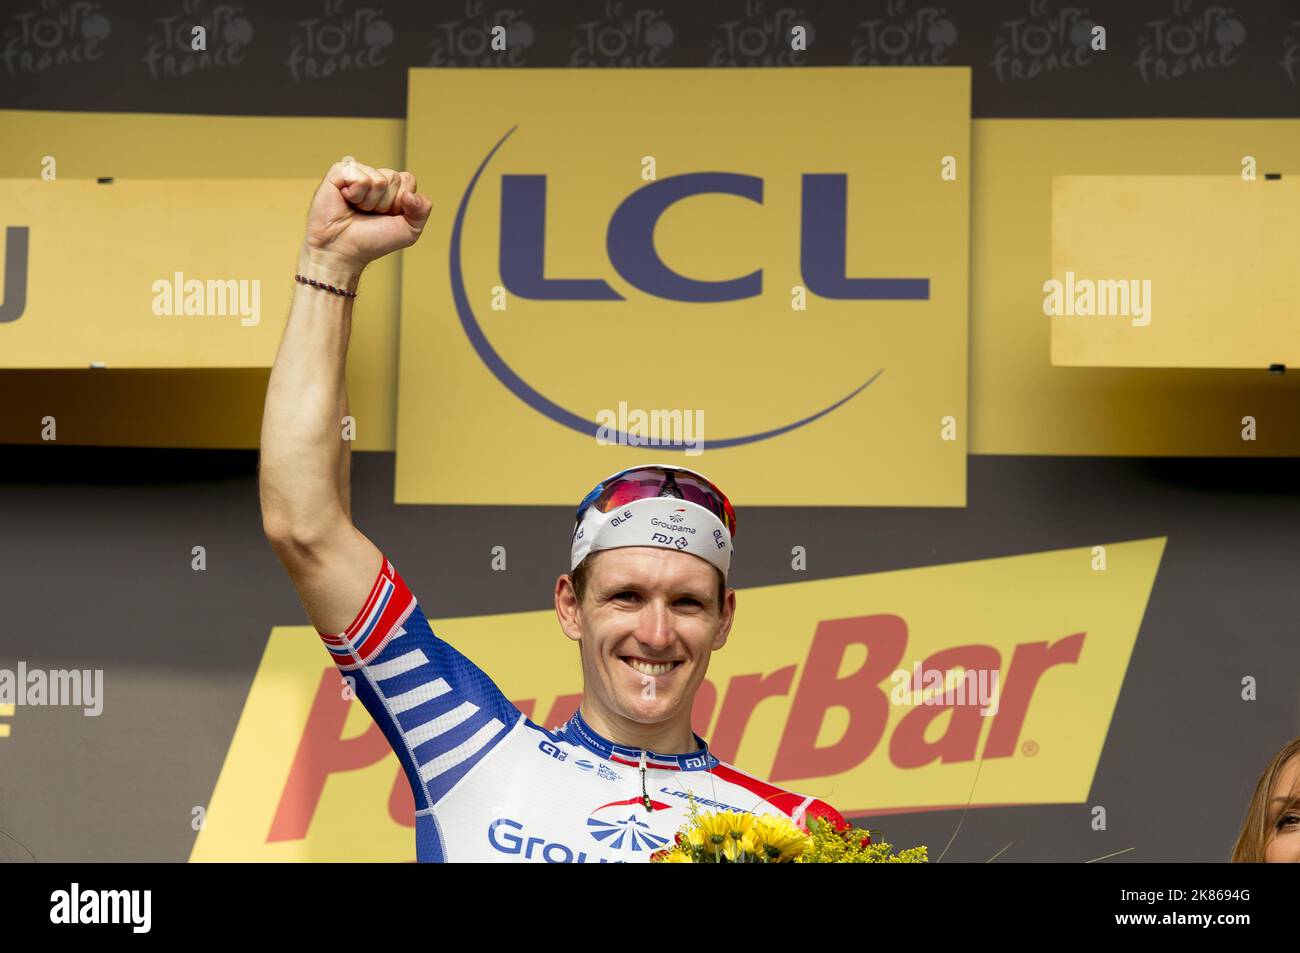 French Rider Arnaud Demare wins the stage in a sprint finish in Pau during stage 18 of the Tour de France 2018  Stock Photo